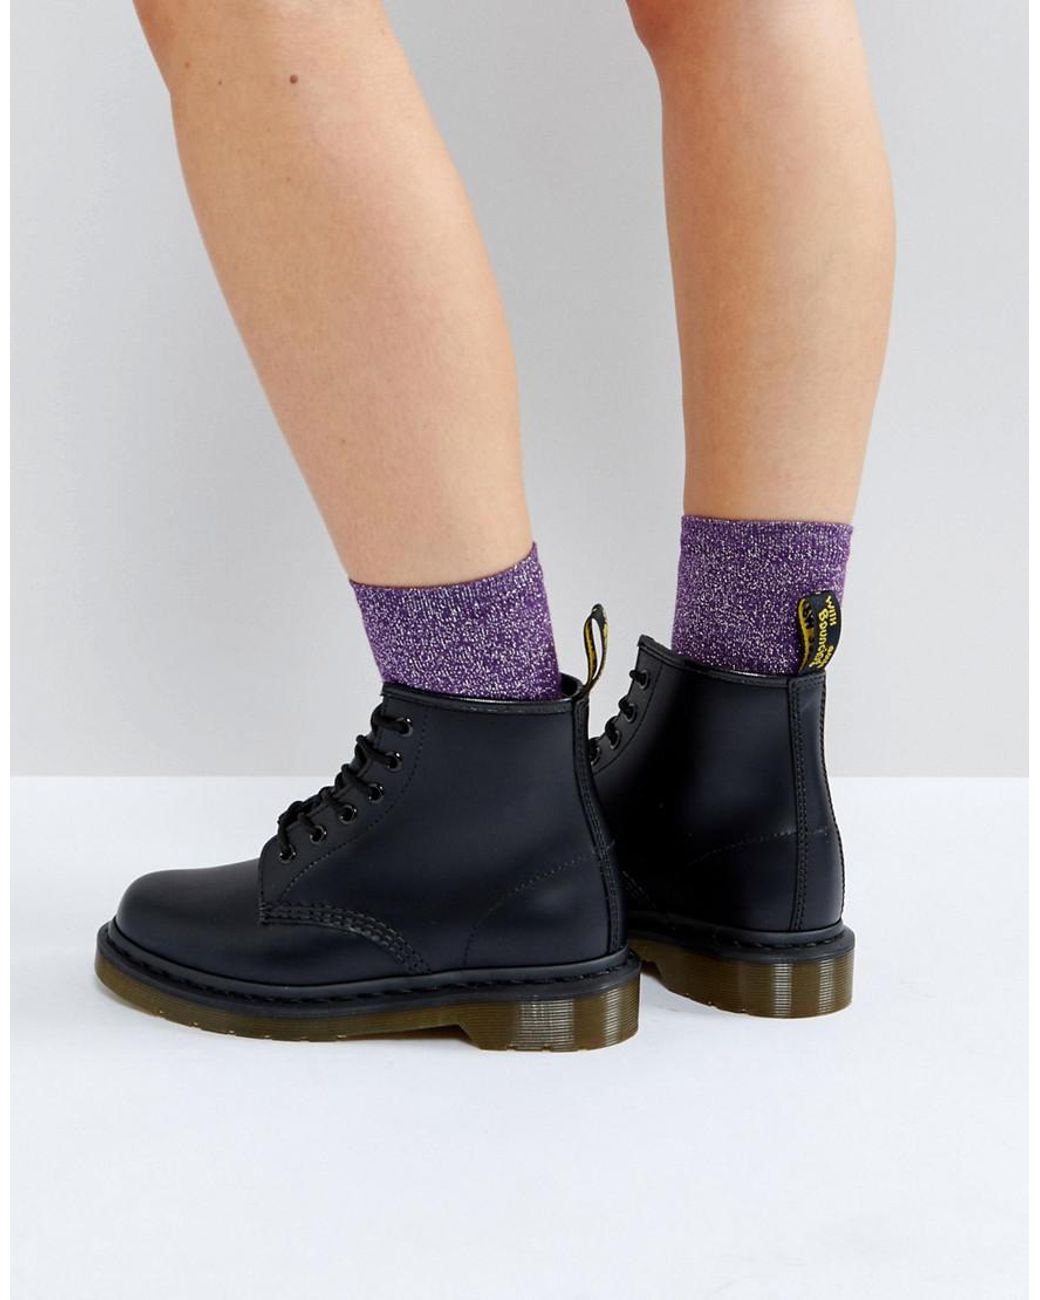 Dr. Martens 101 Smooth Boots in Black | Lyst UK